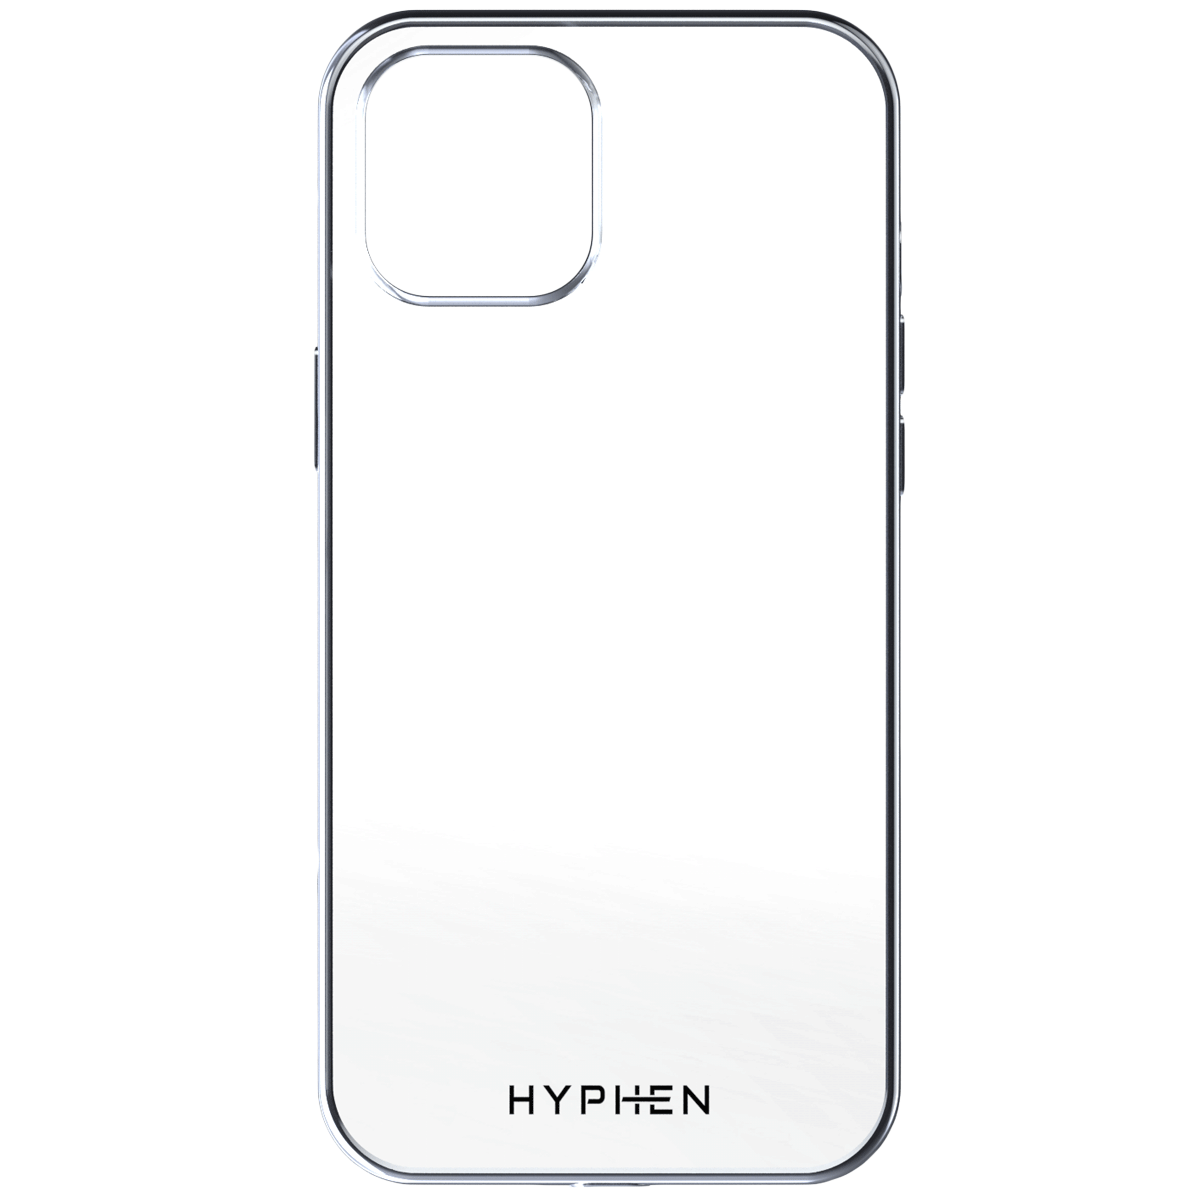 Hyphen Frame TPU Back Case For iPhone 12 Pro Max (Compact, Flexible and Slim Design, HPC-FXII679002, Silver)_4